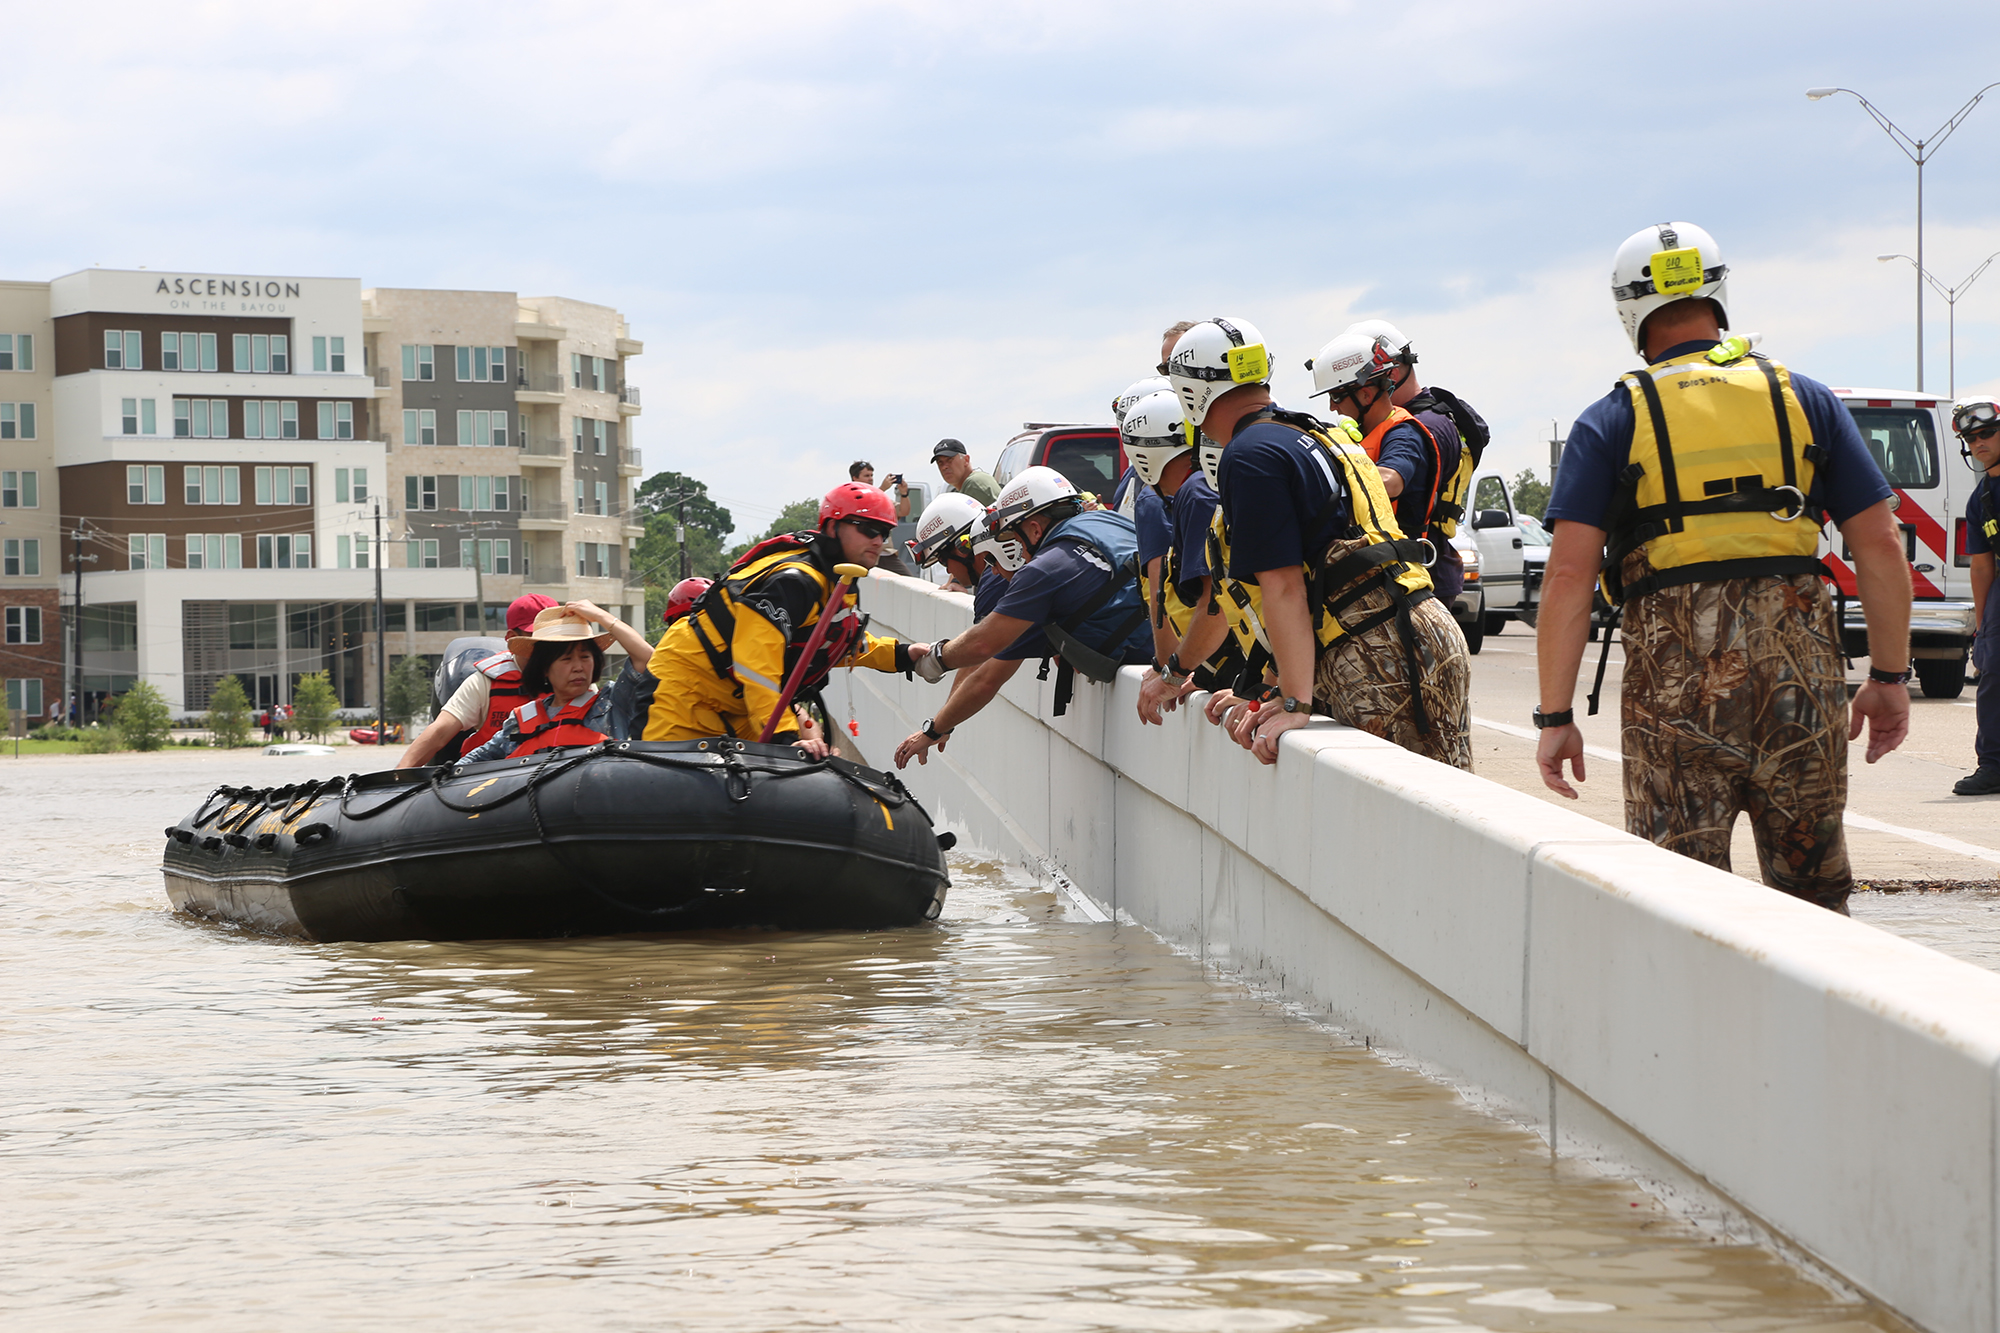 Members of FEMA's Urban Search and Rescue Nebraska Task Force One (NE-TF1) perform one of many water rescues in the aftermath of Hurricane Harvey